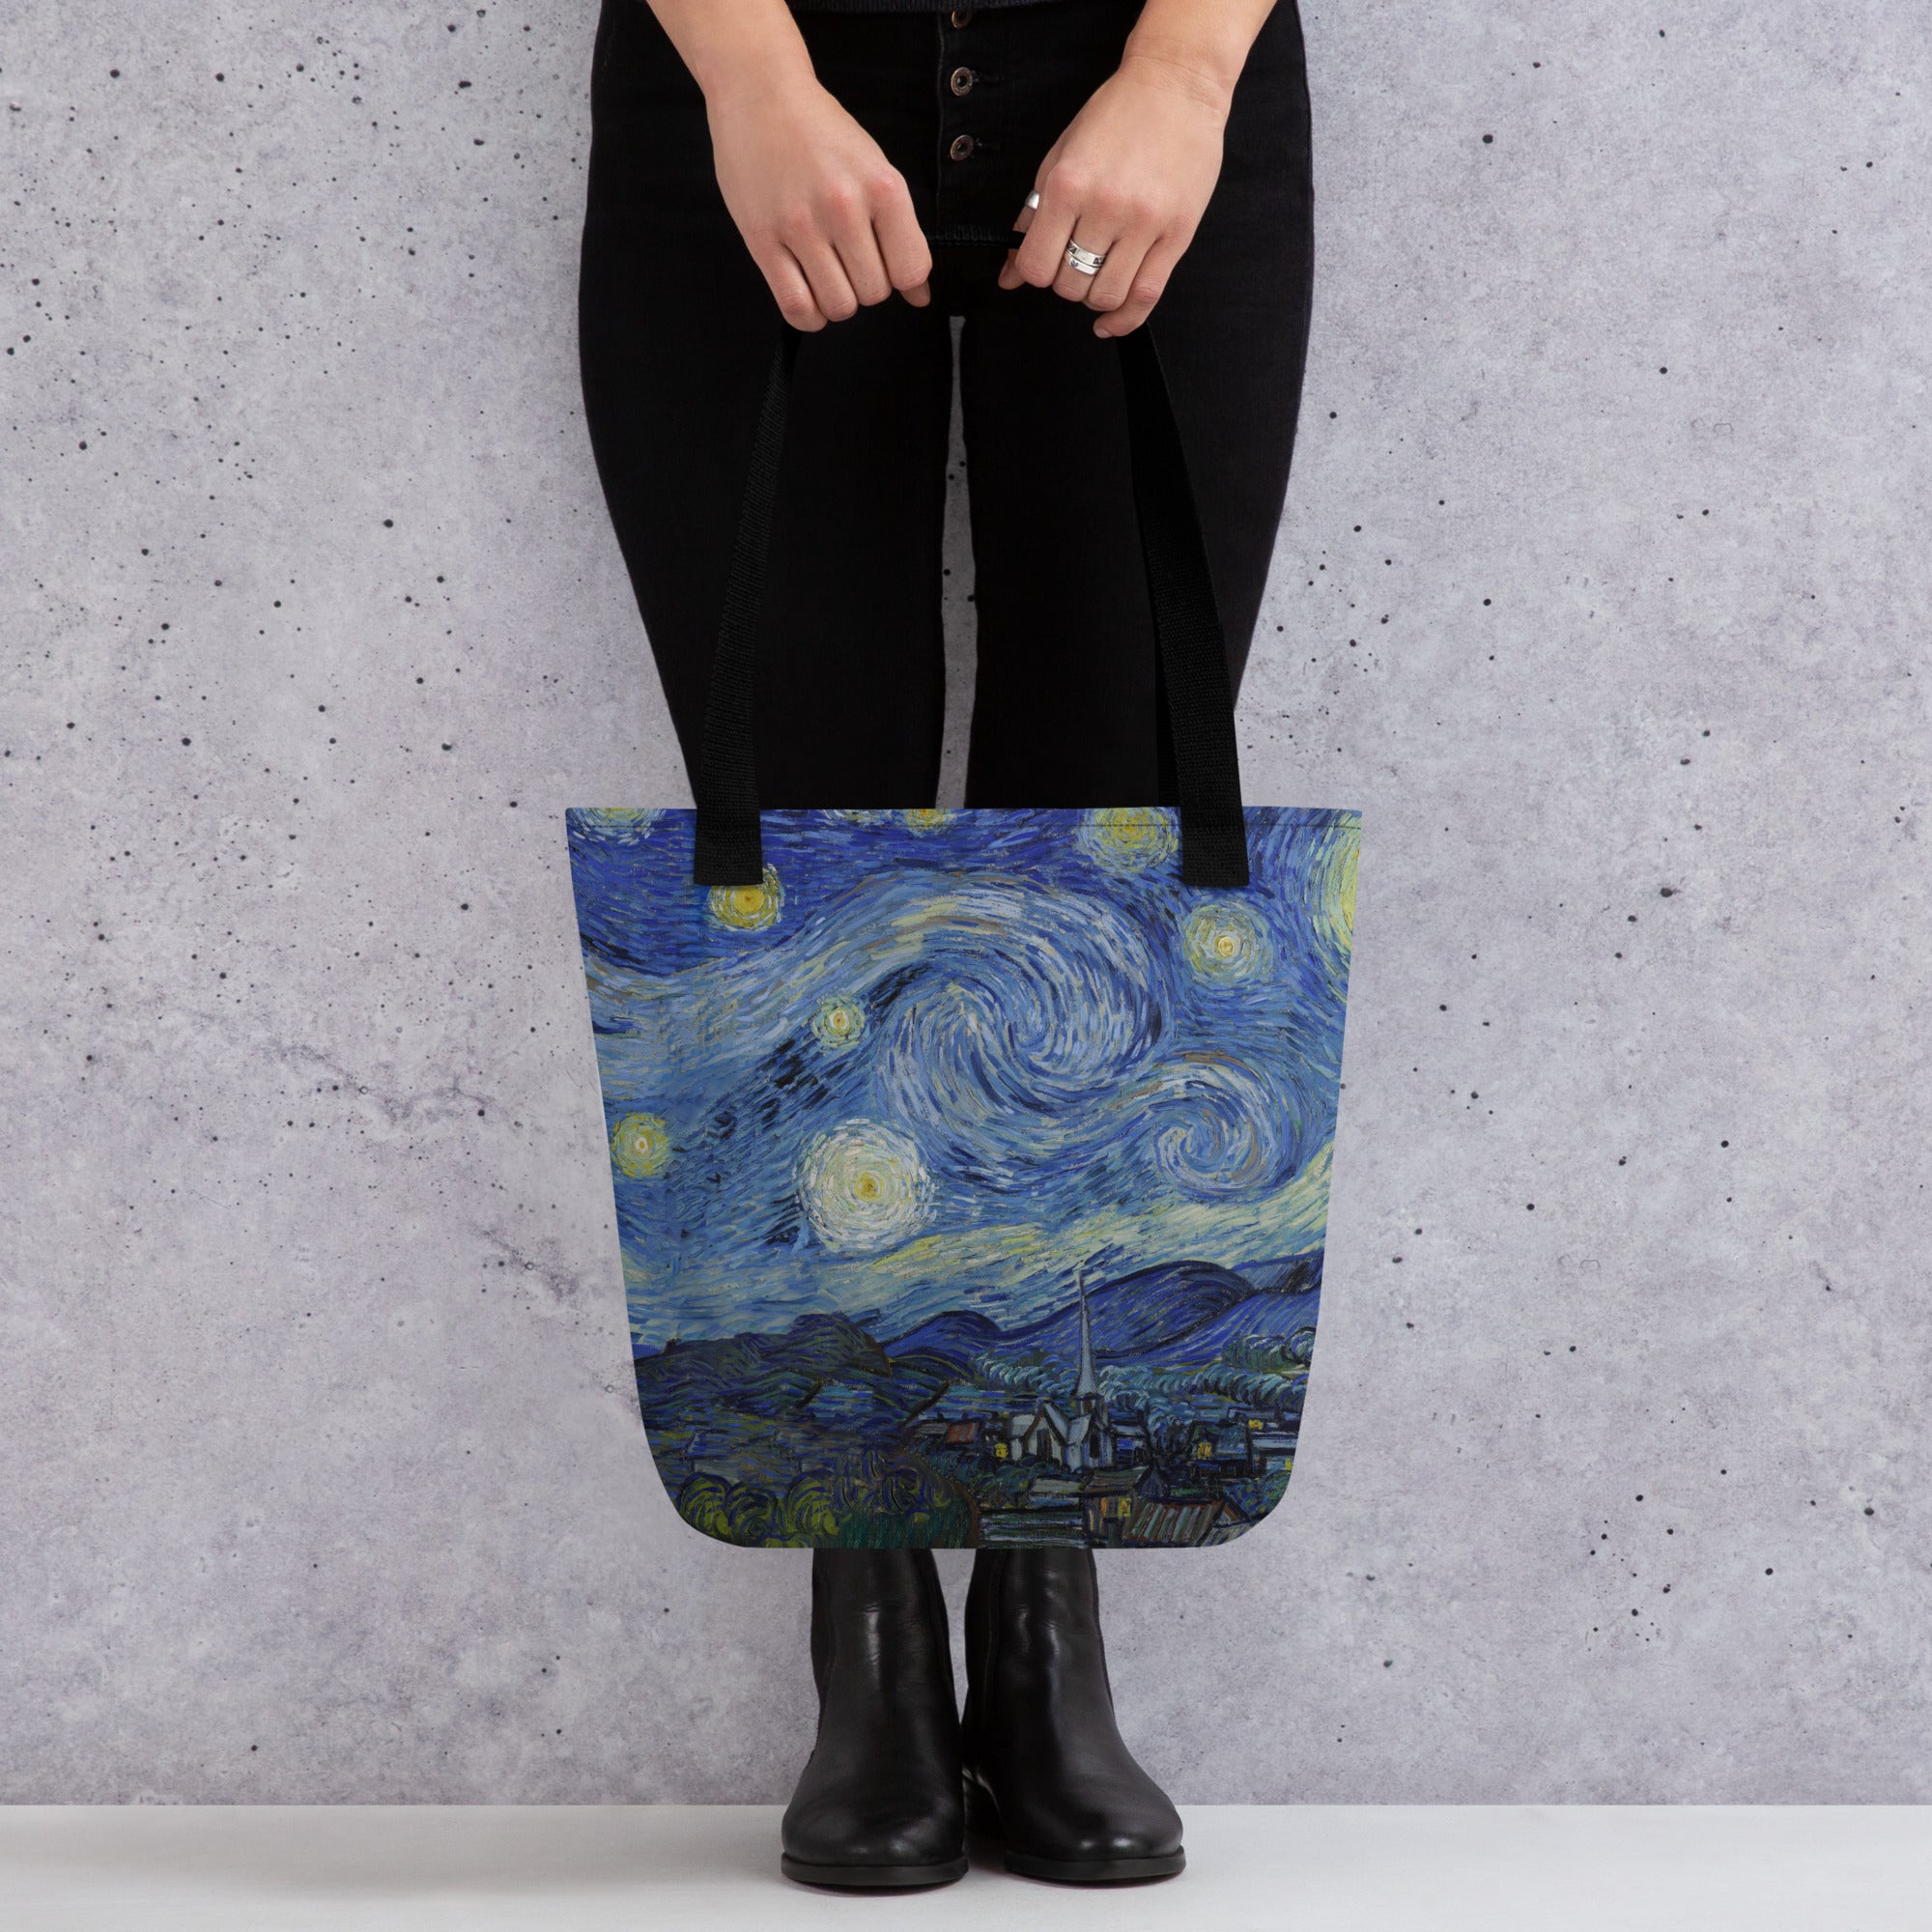 Vincent van Gogh 'Starry Night' Famous Painting Totebag | Allover Print Art Tote Bag